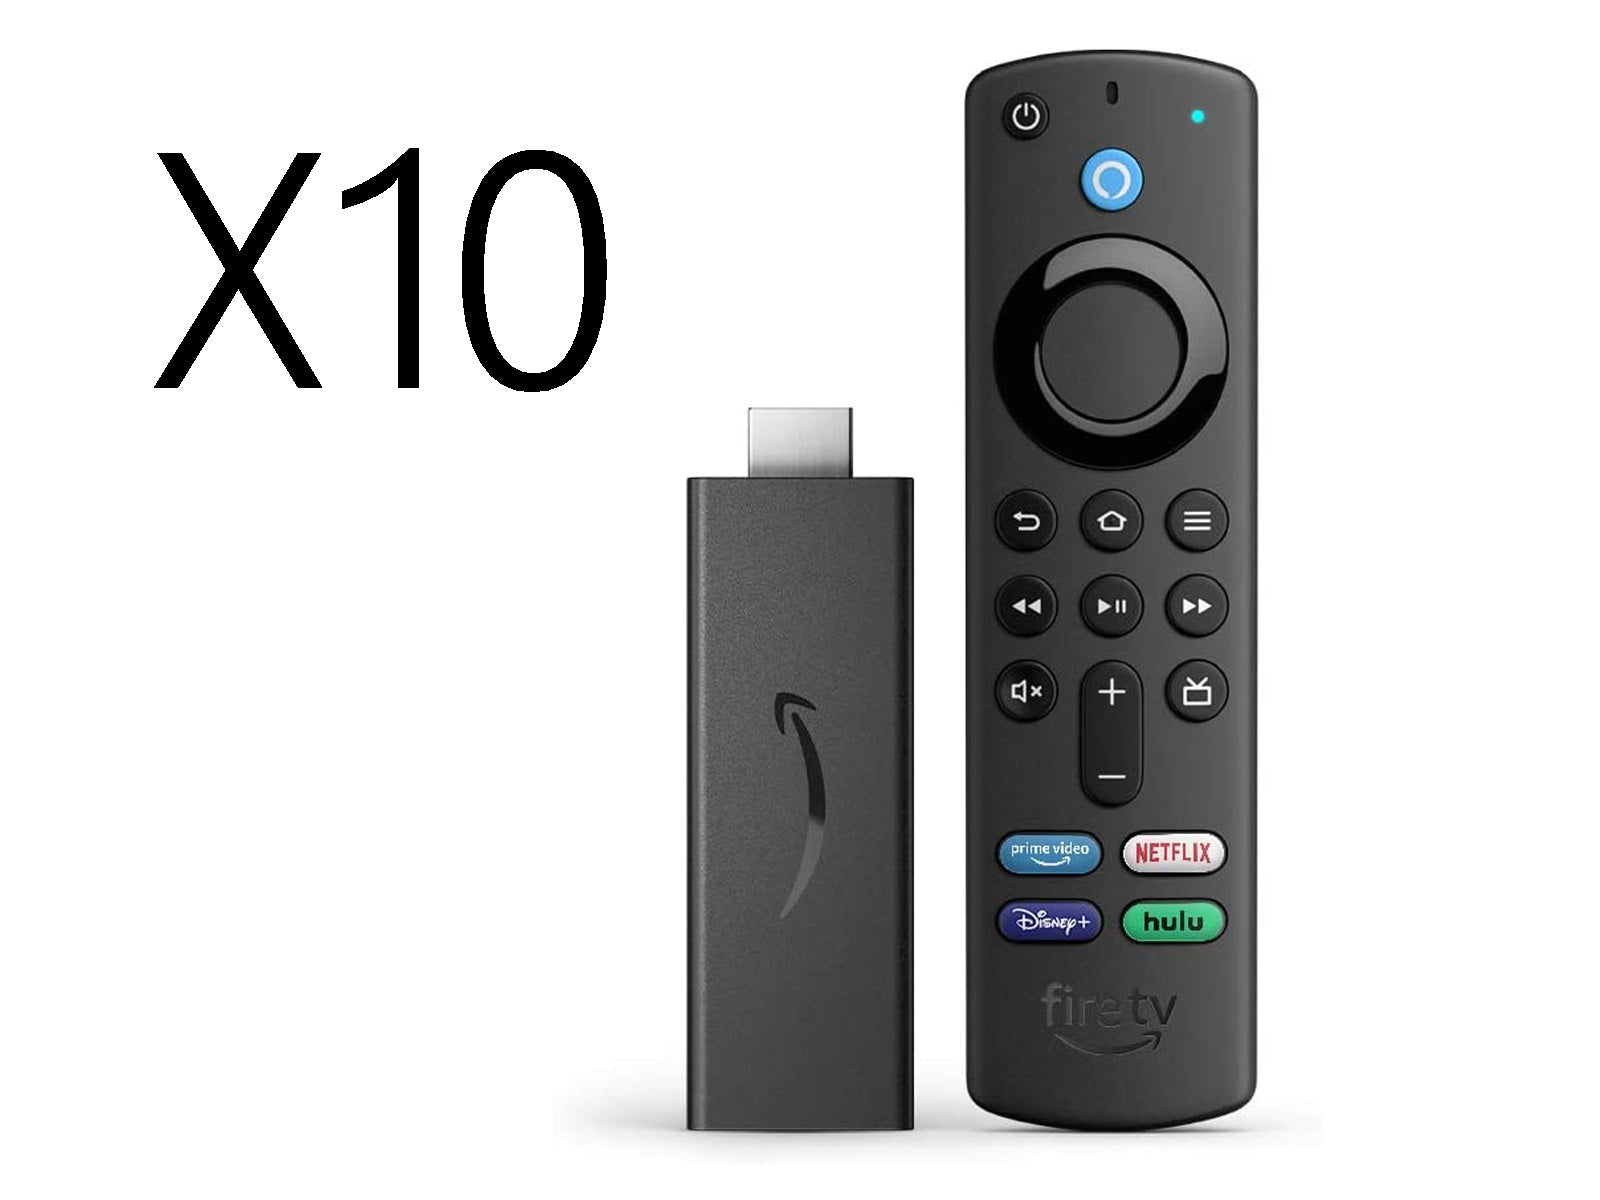 Amazon HD Fire-TV Stick (3rd Gen) with Alexa Voice Remote AmazonImage shows the Amazon Fire TV Stick HD 2020 Pack of 10